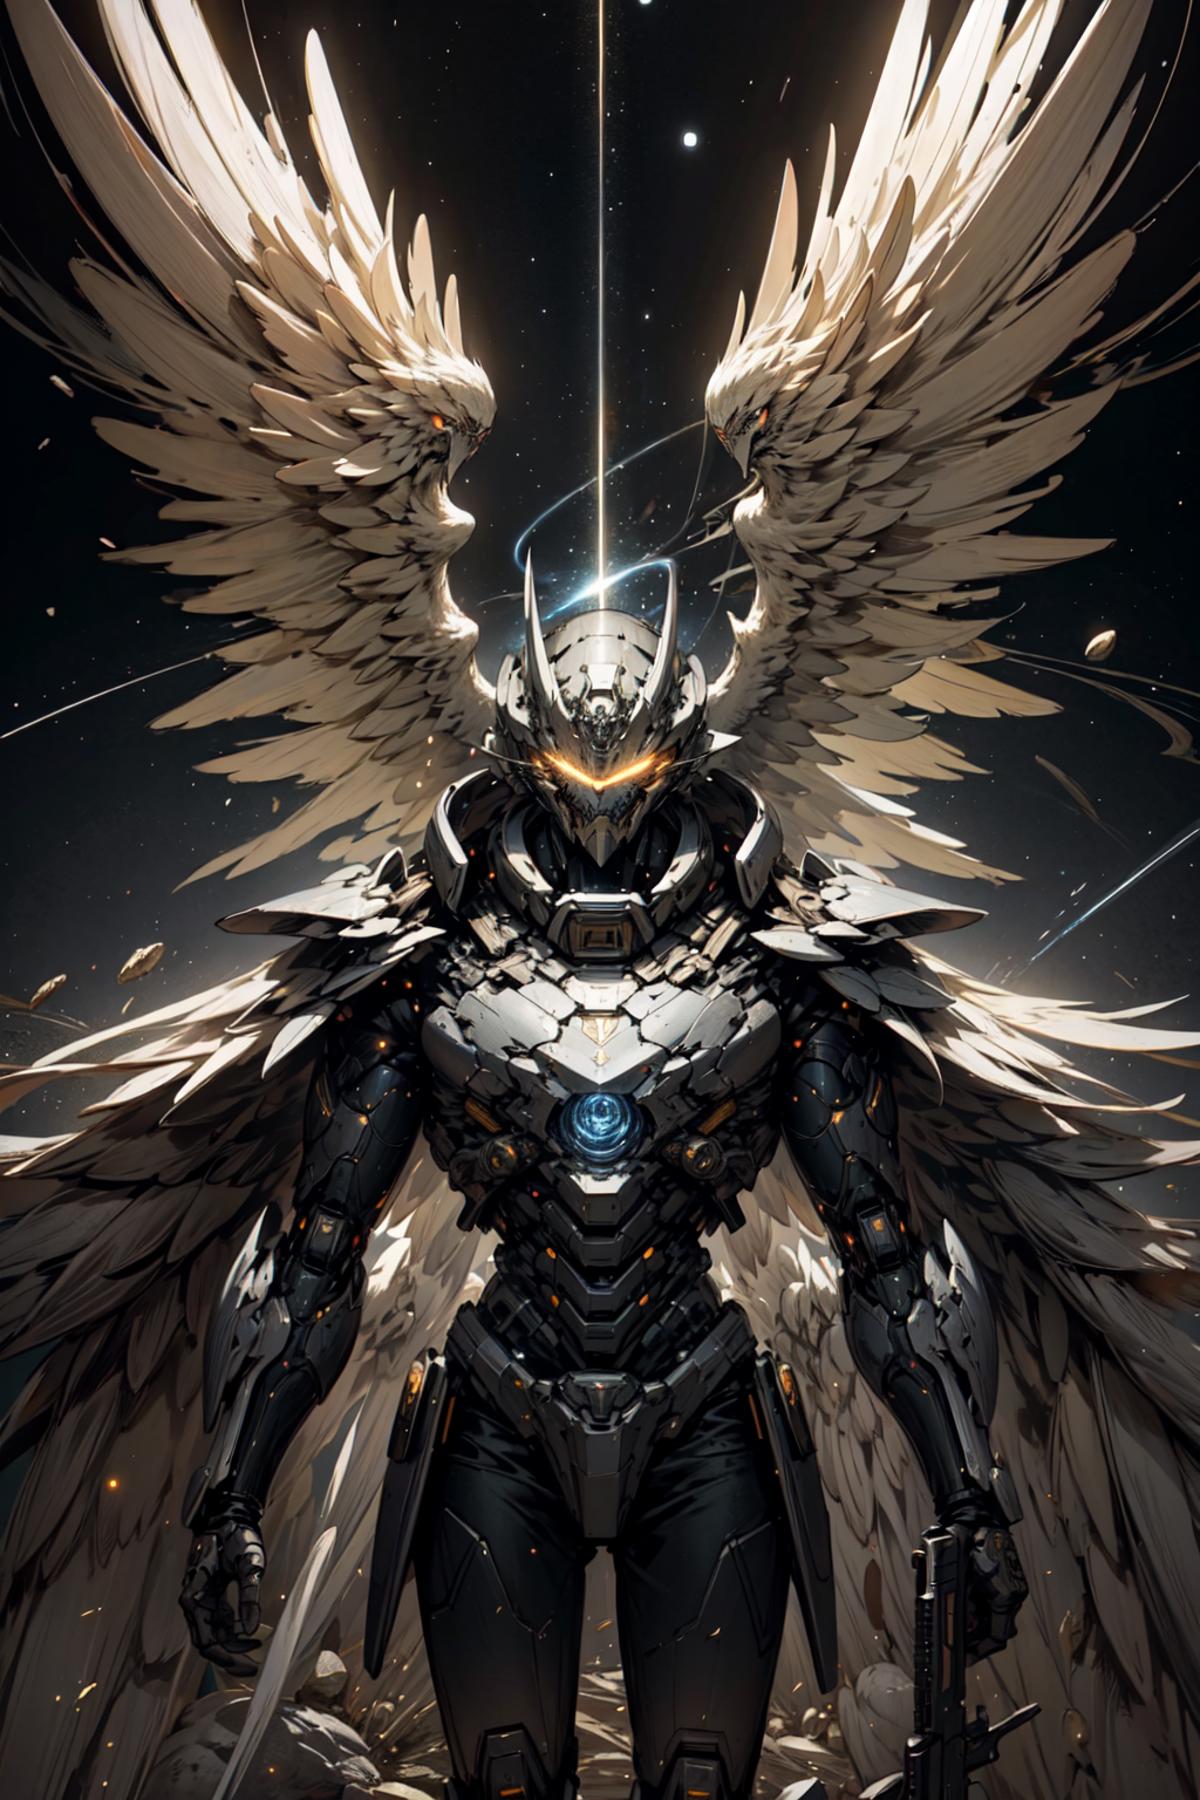 A robotic figure with wings and a helmet, standing against a dark background.